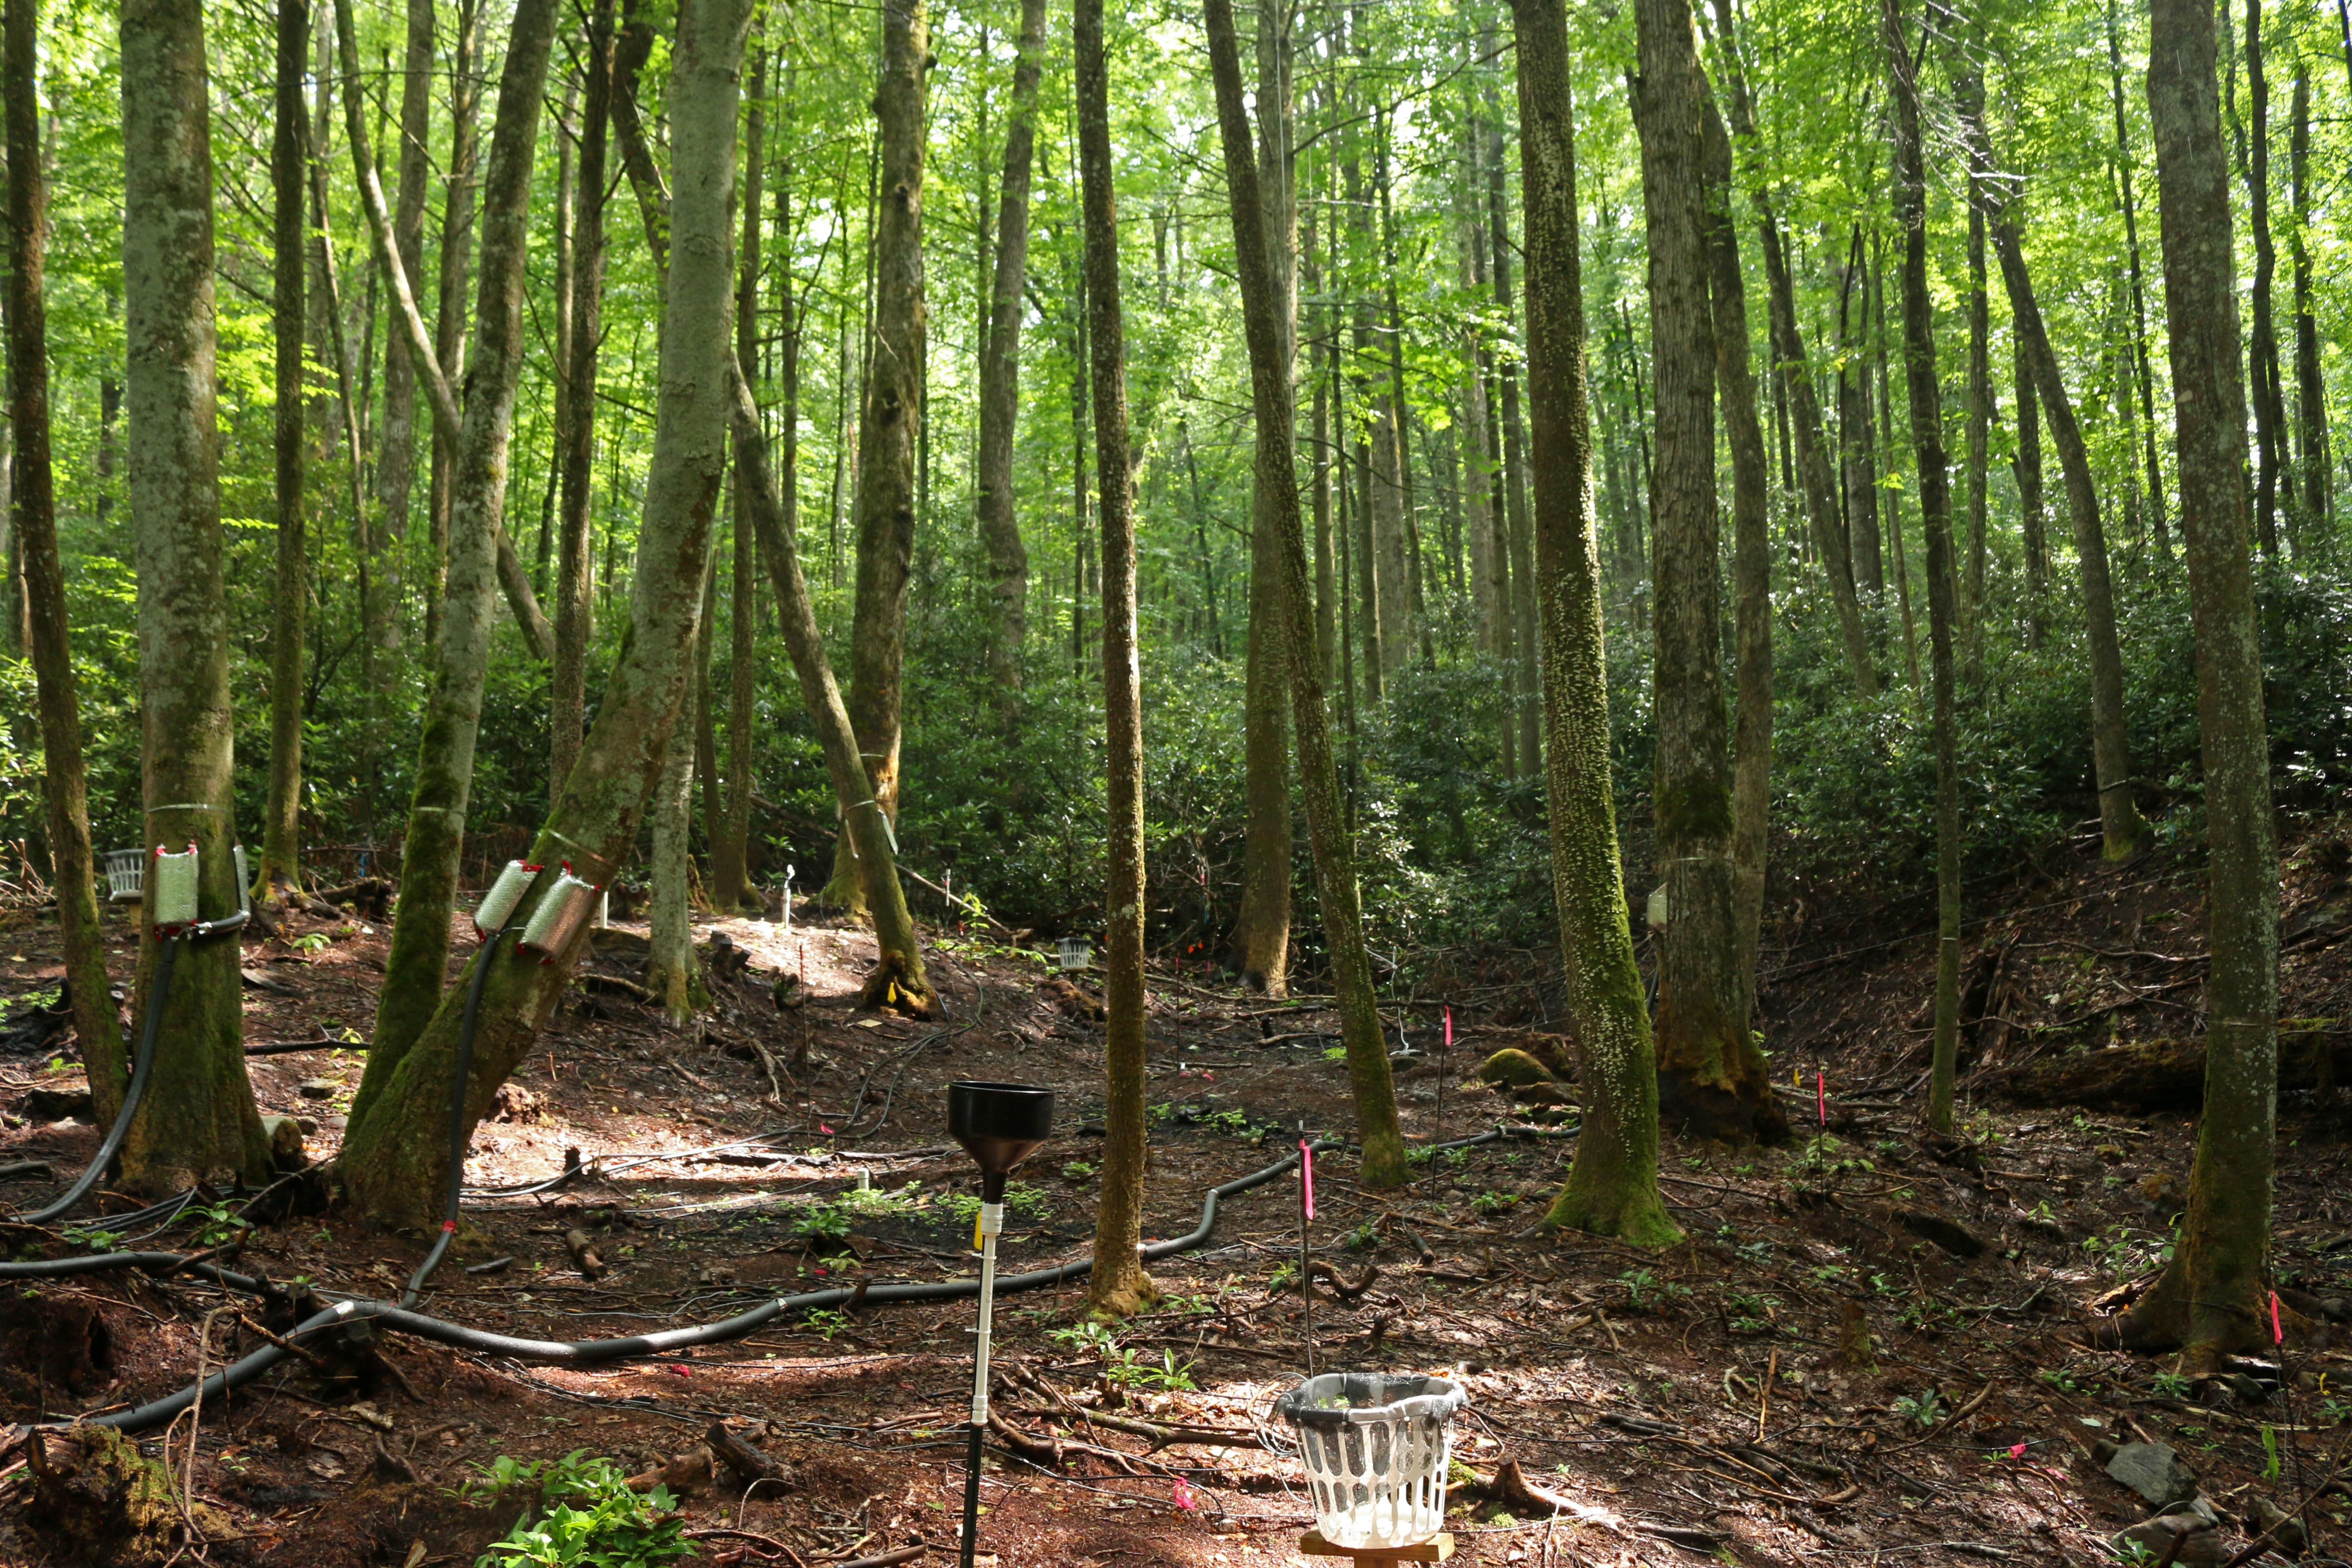 hydrologic research plot in the Southern Appalachian Mountain study area